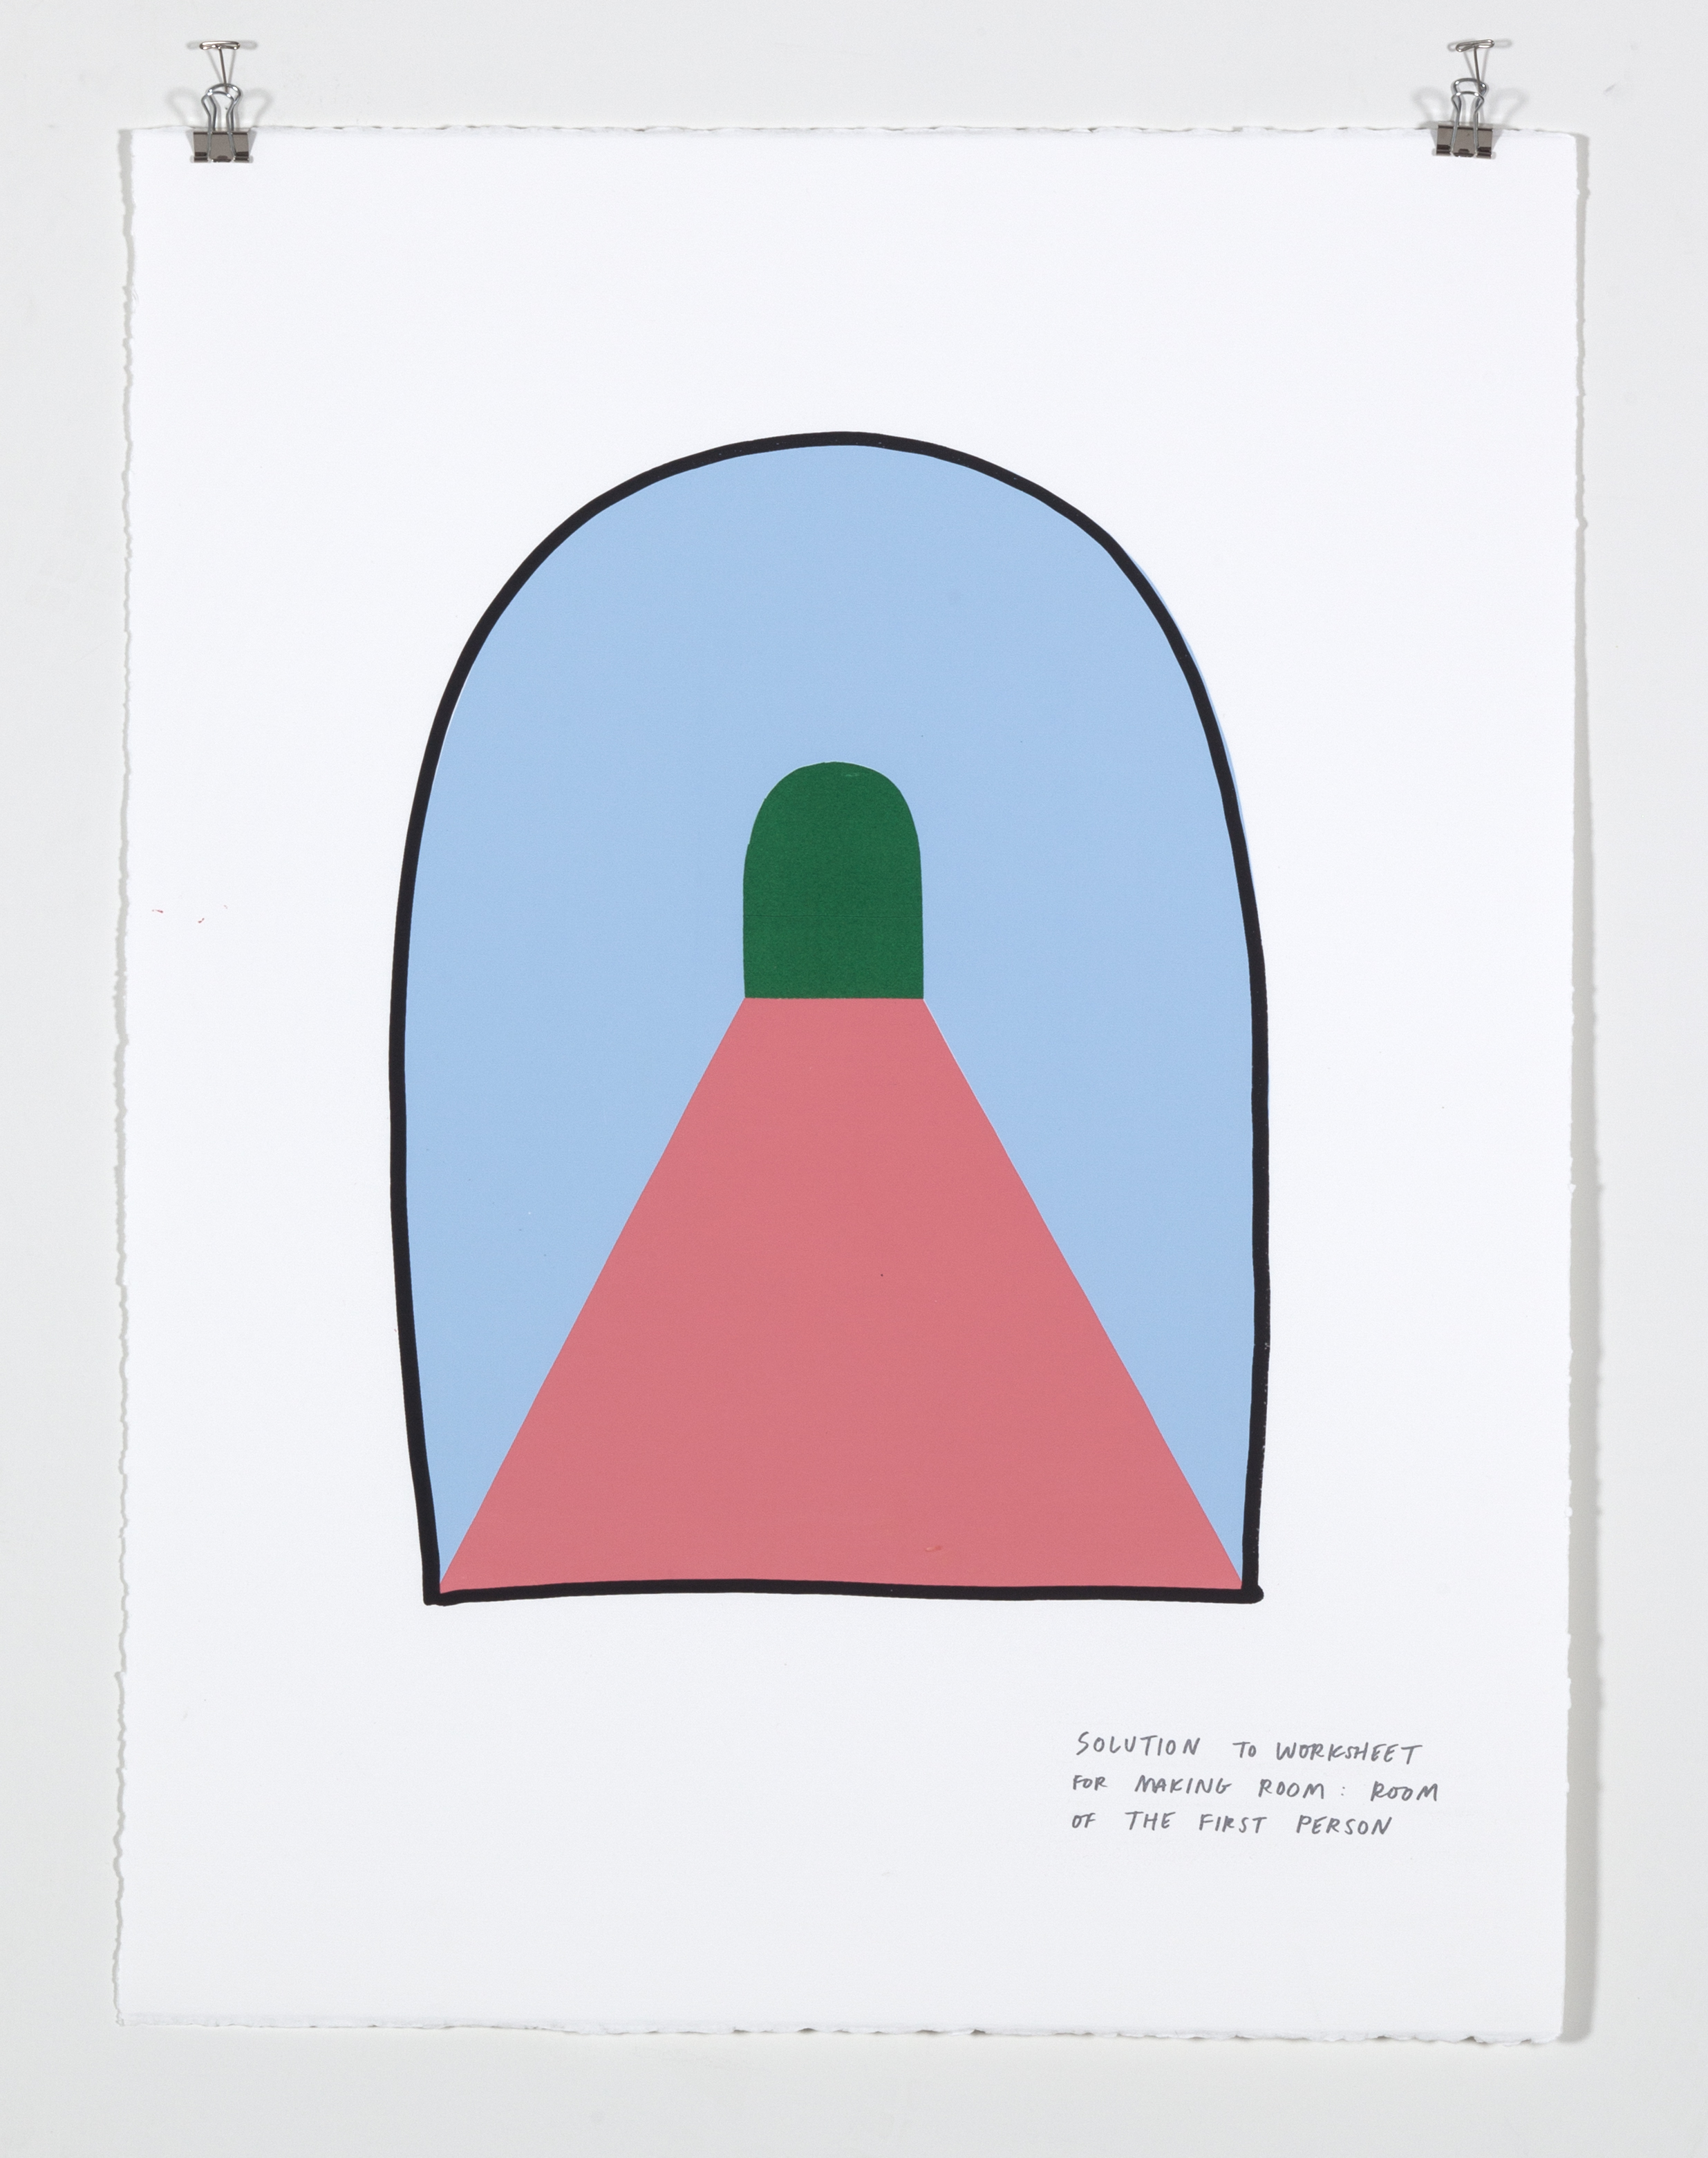    Solution to Worksheet for Making Room: Room of the First Person,  2018  Five color silkscreen print on paper 19 7/8 x 25 7/8 inches 